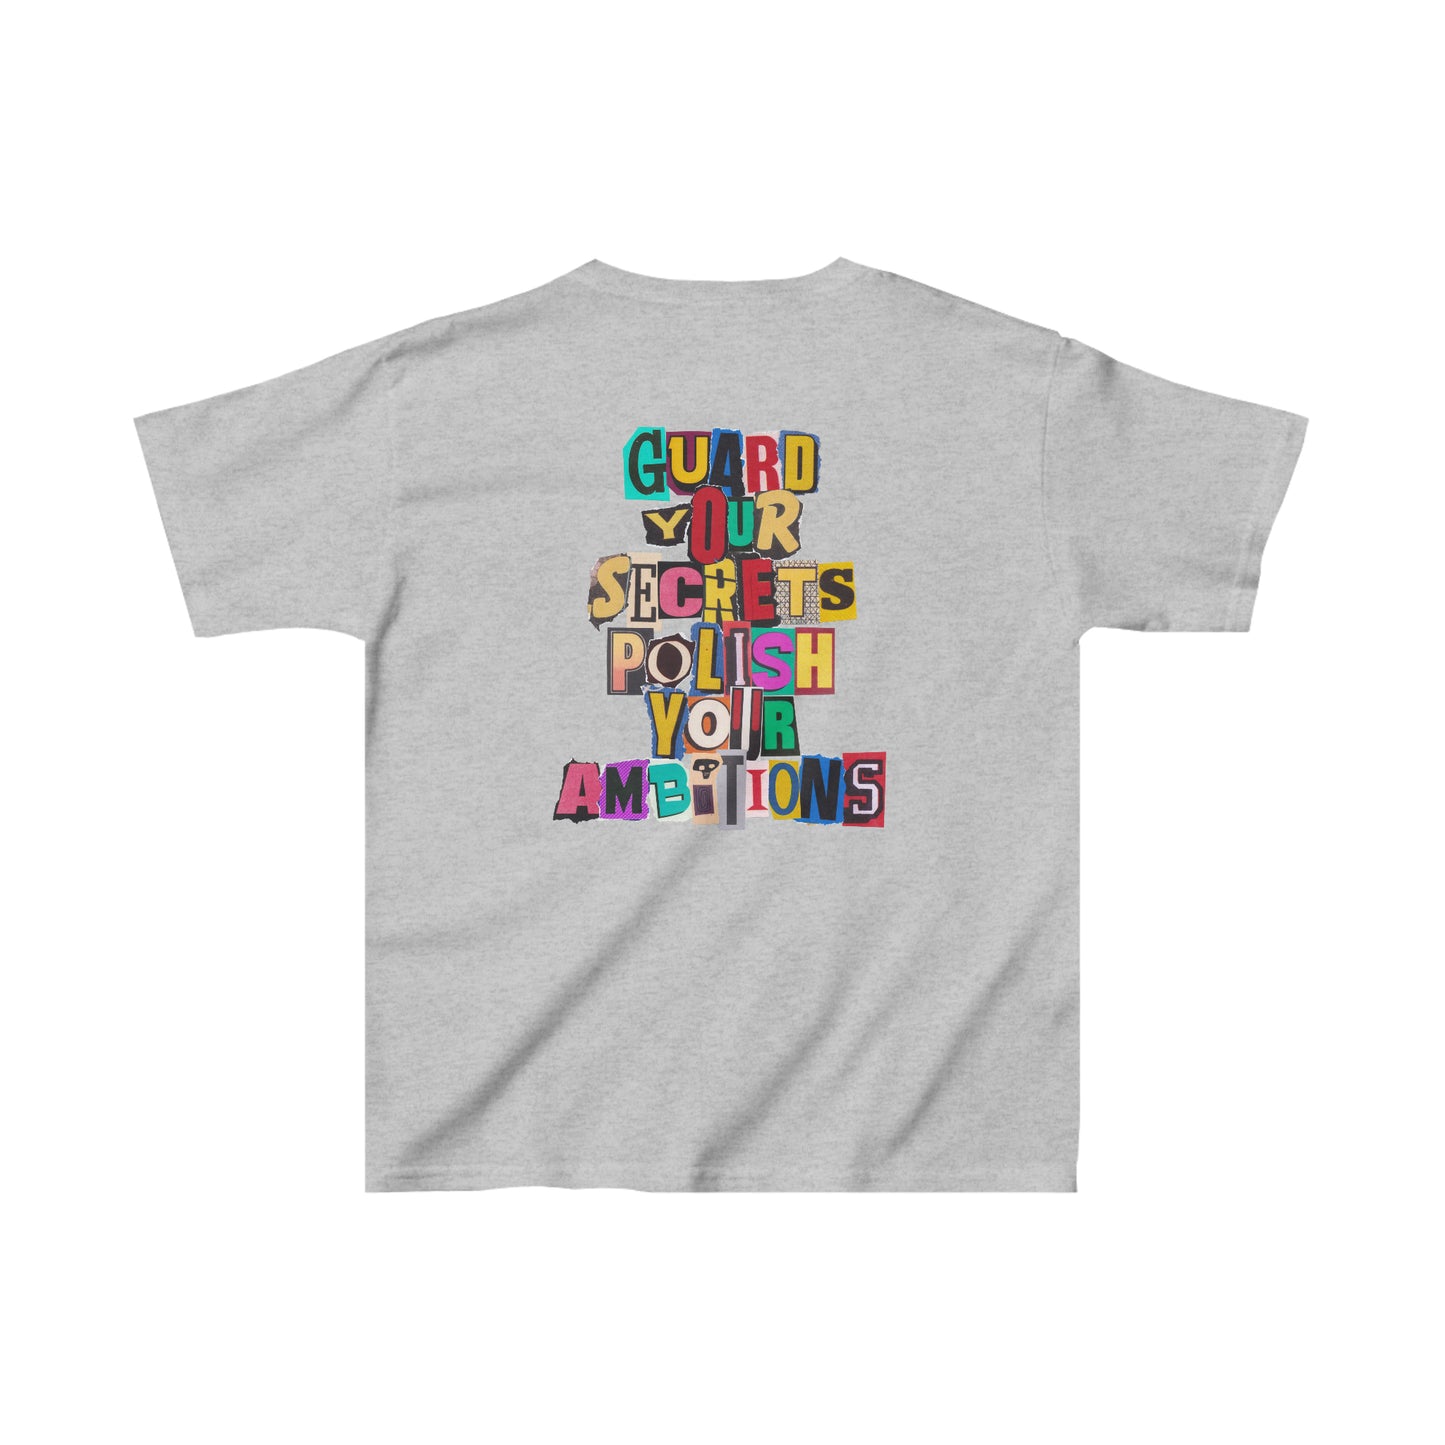 Youth WIY x Donald Vintage T-Shirt